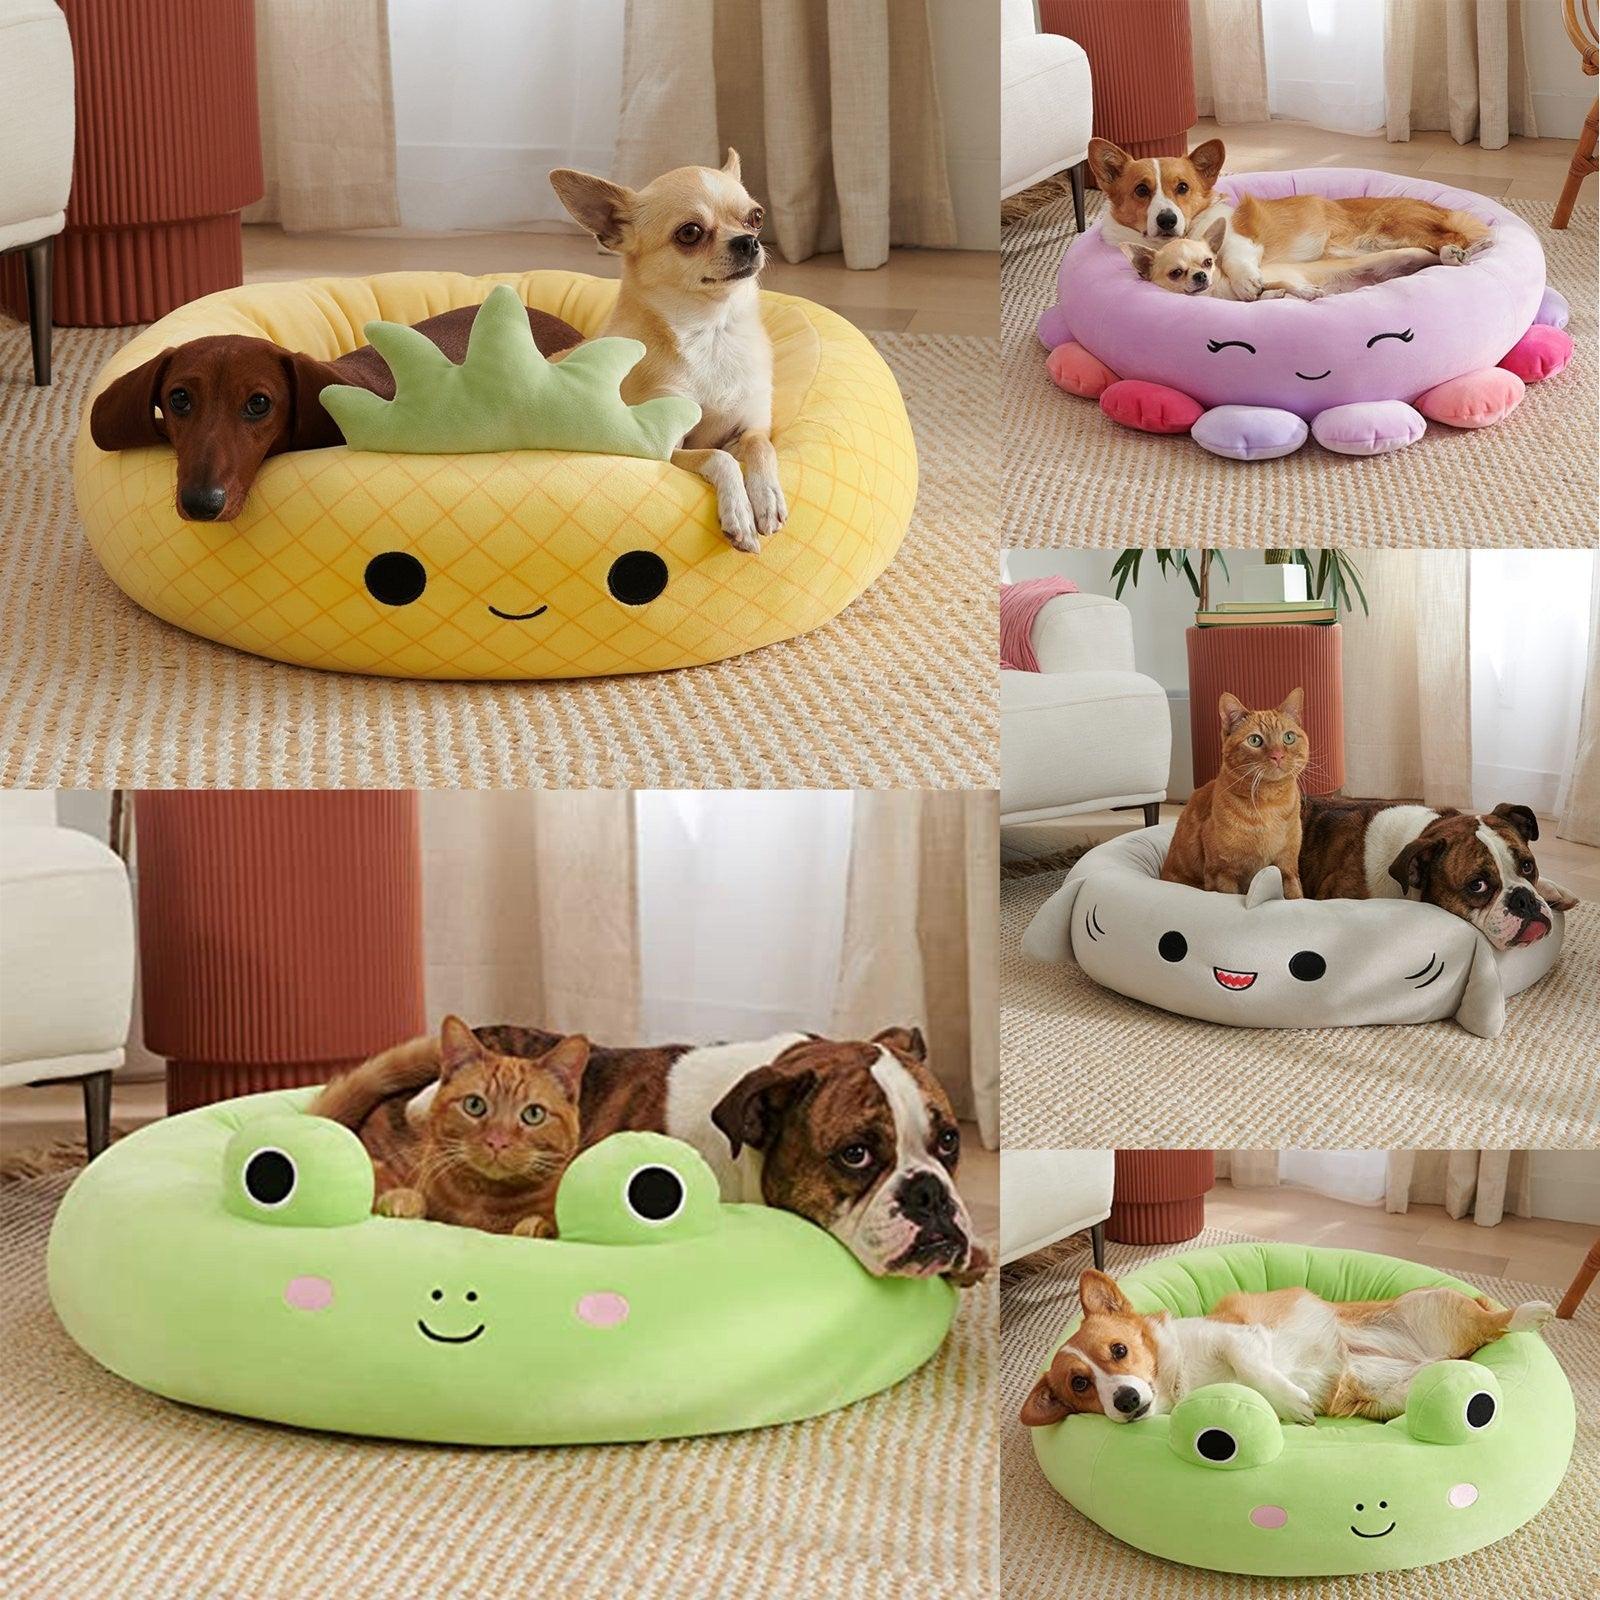 Creative Dog And Cat Beds - Silvis21 ™